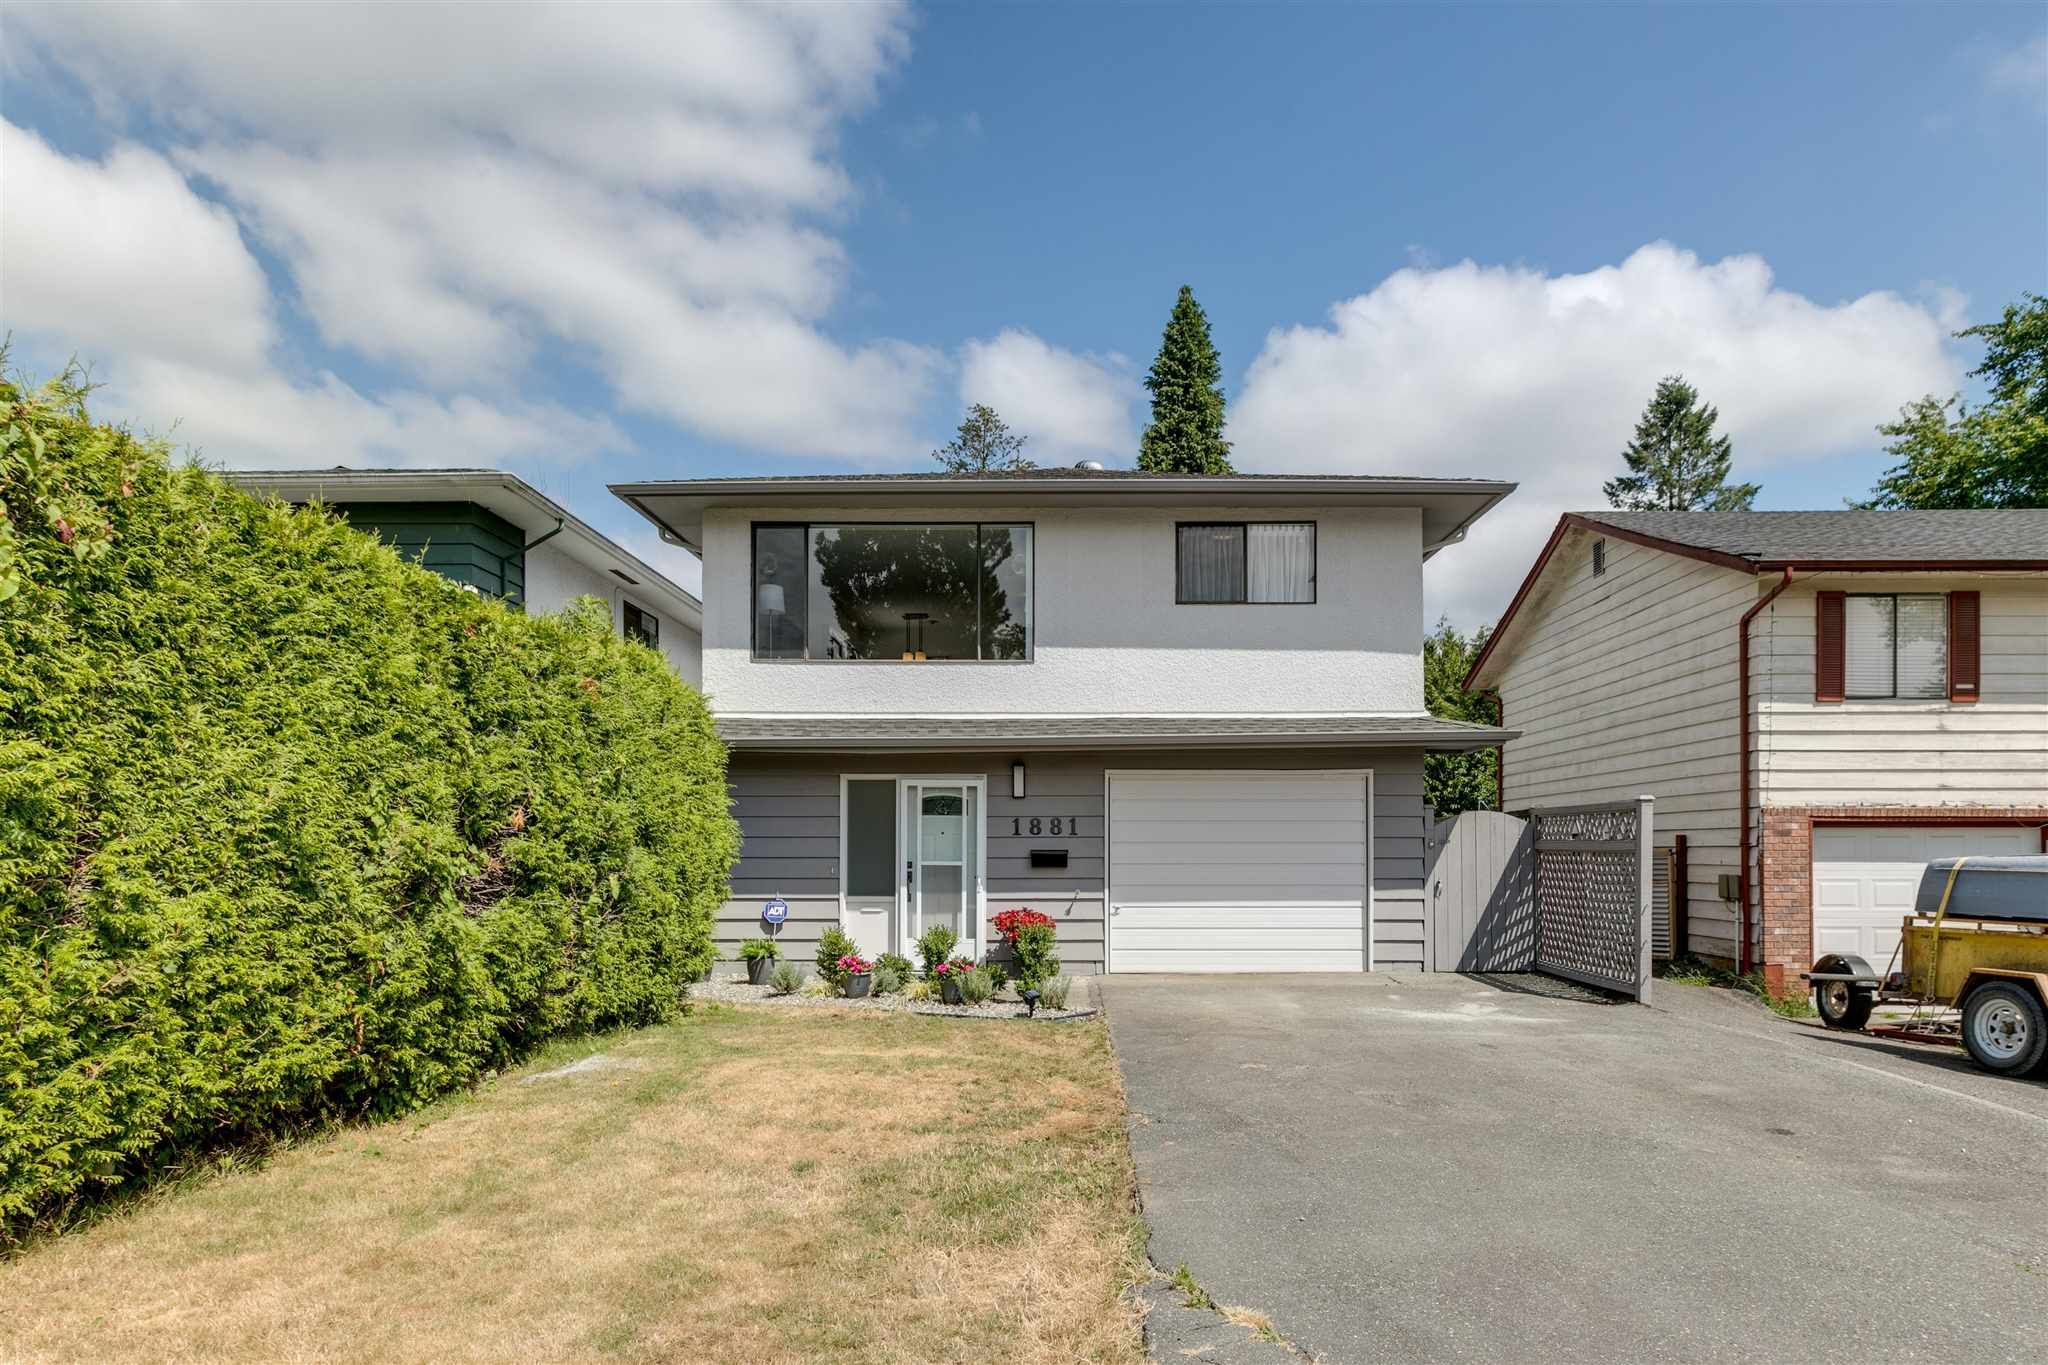 I have sold a property at 1881 SUFFOLK AVE in Port Coquitlam
